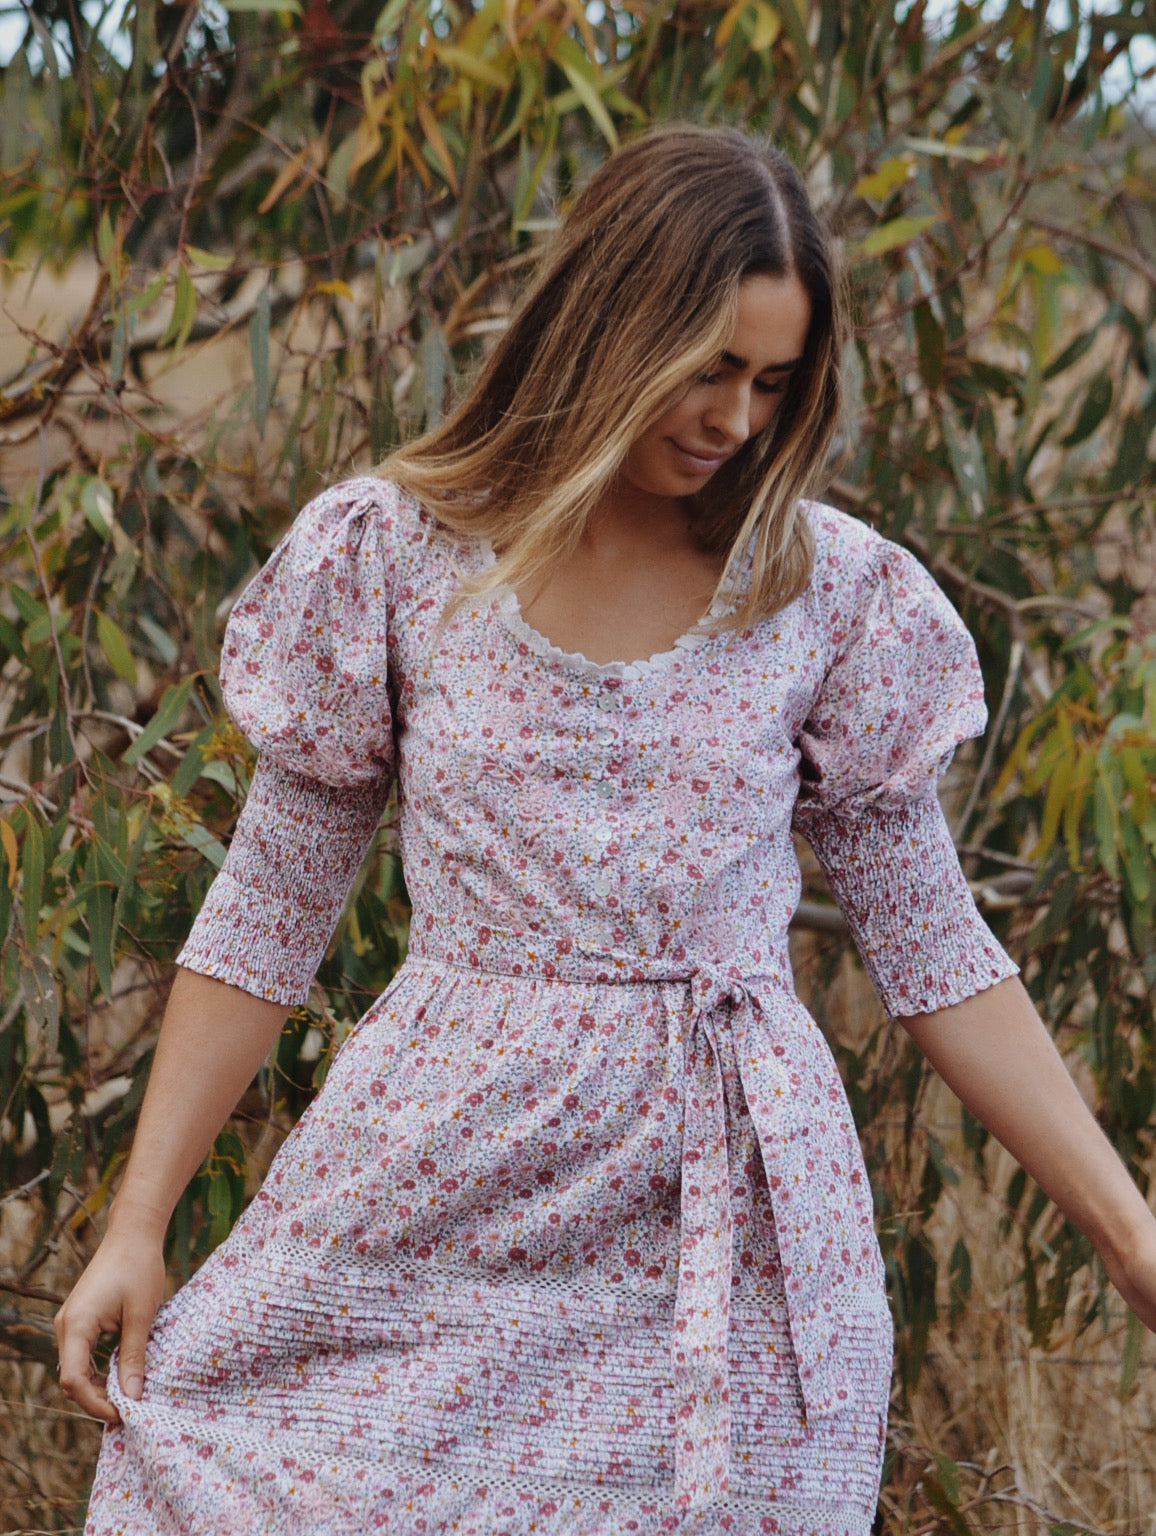 SECOND - AUGUSTINE MAXI DRESS PINK DITSY FLORAL